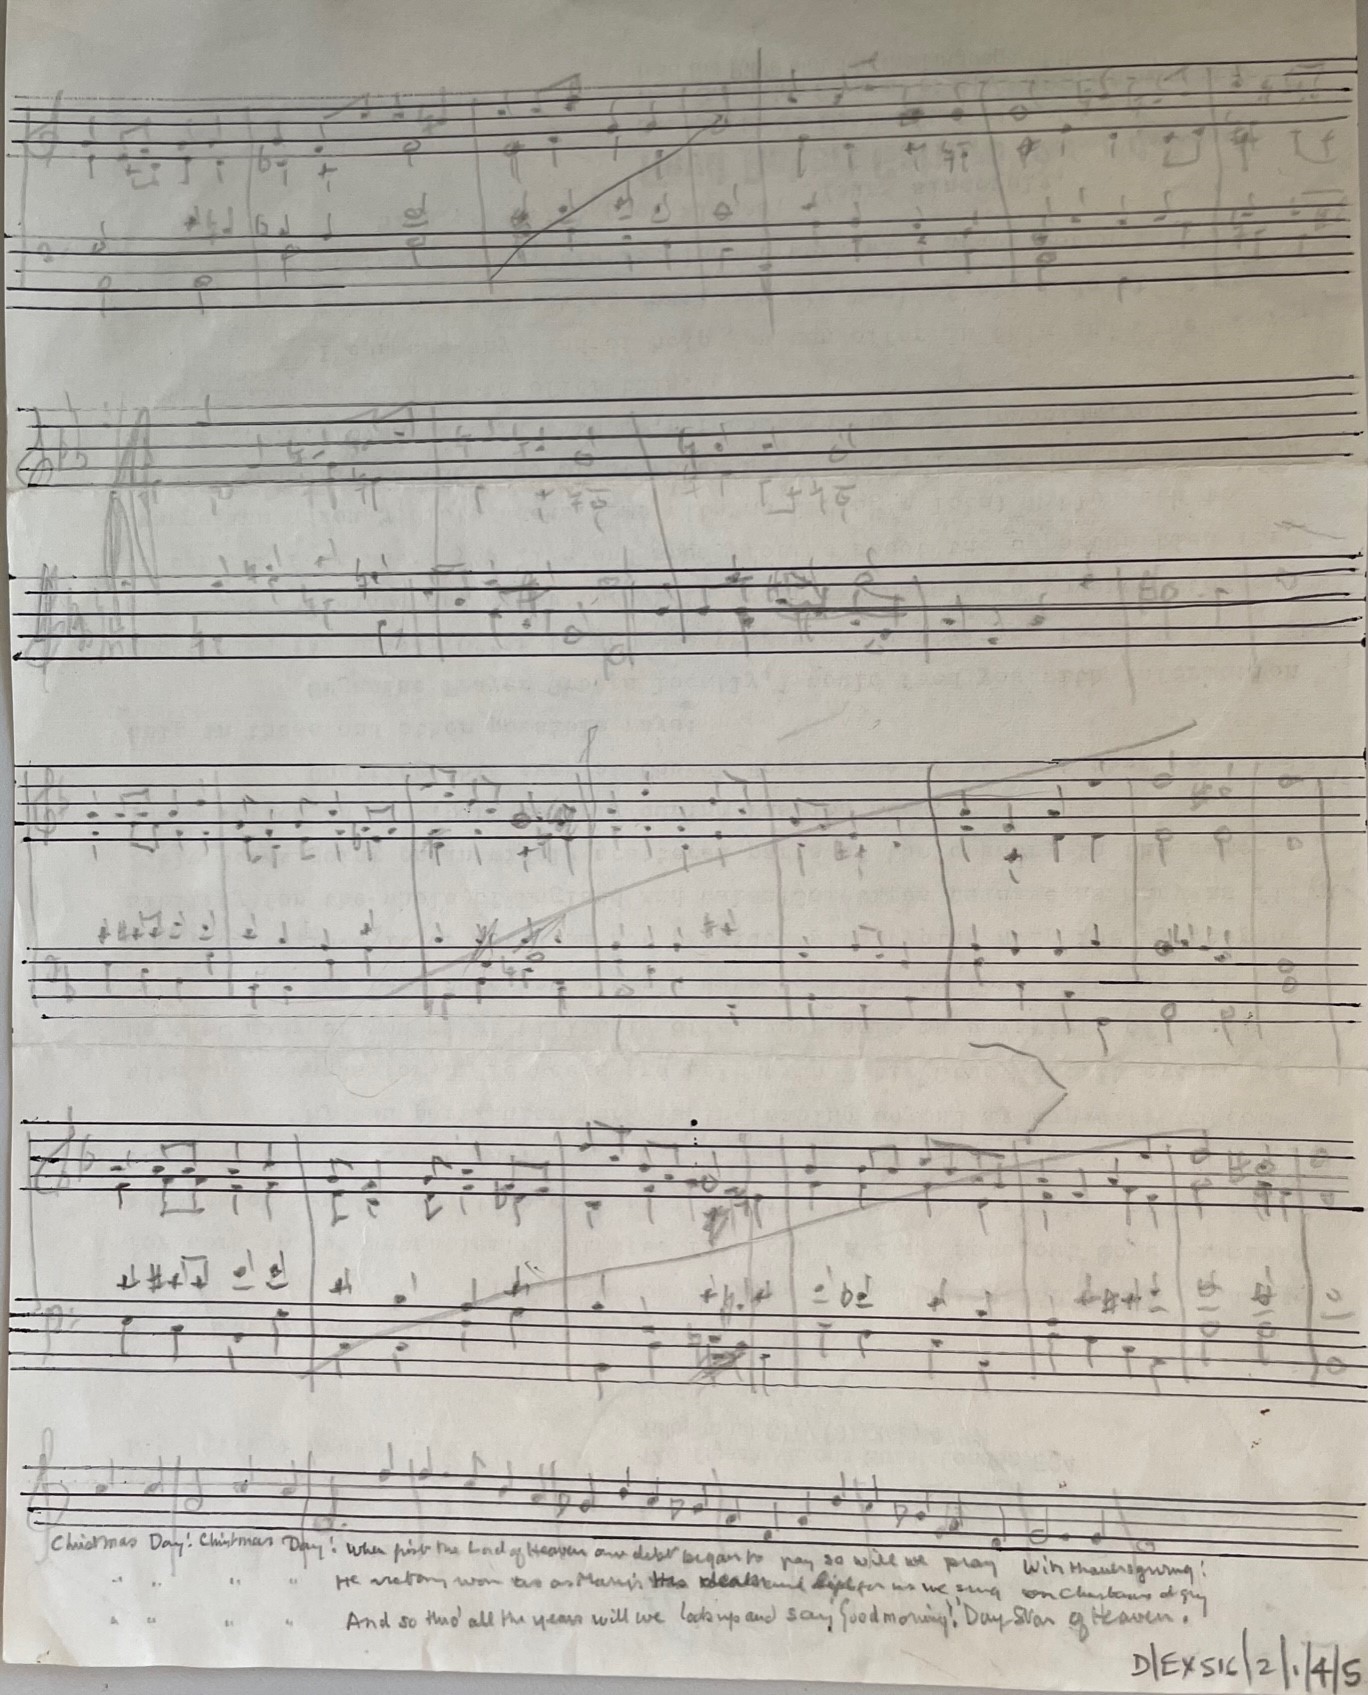 5 lines of hand-written music, some parts crossed through.